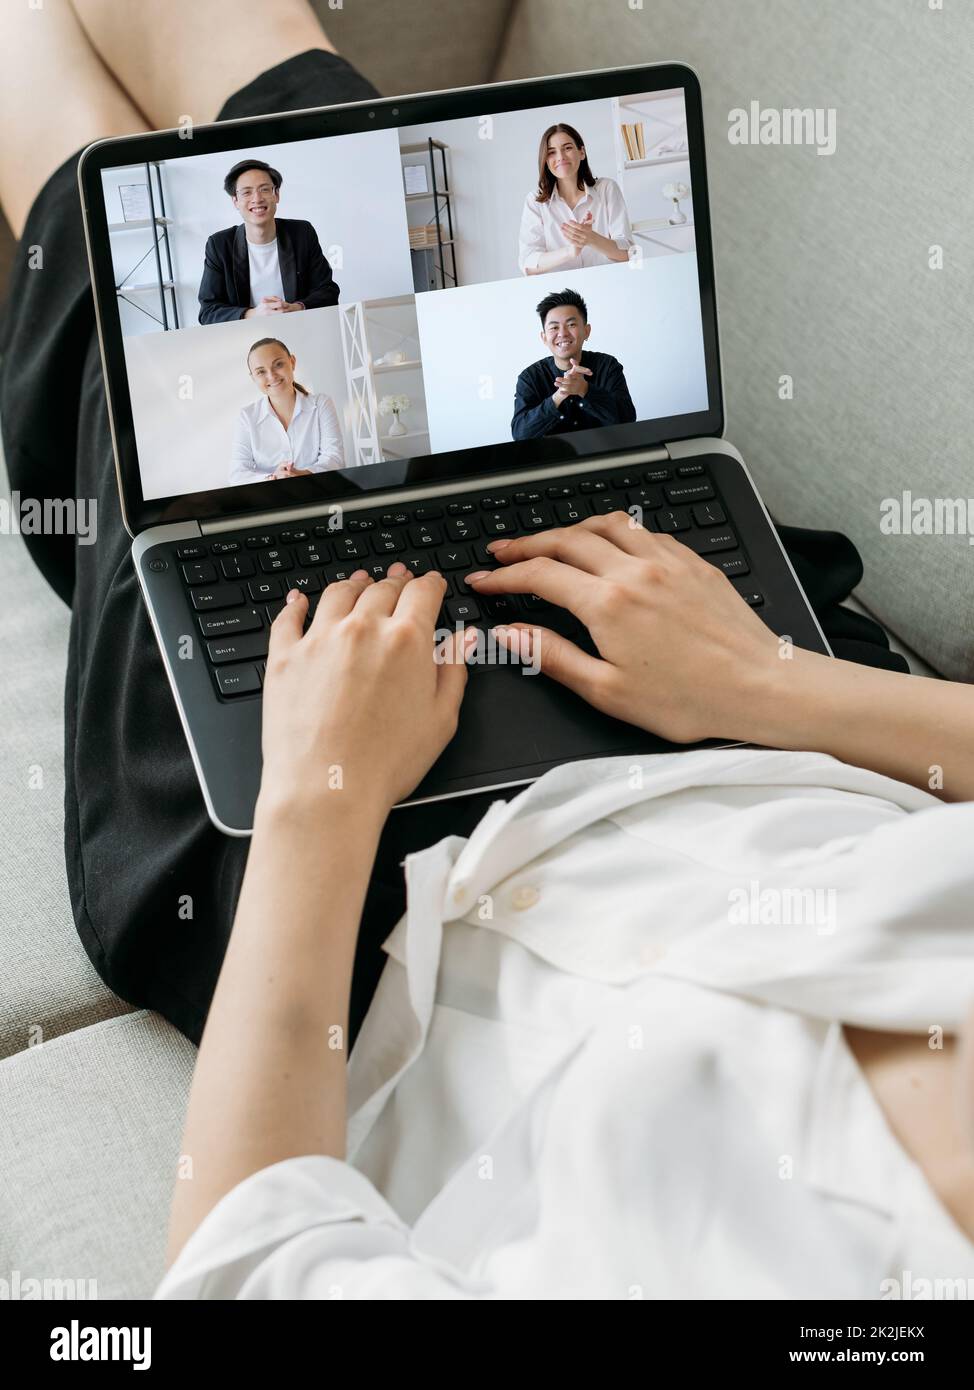 Video call. Global telework. Wfh internet conference. Relaxed woman using laptop on couch working from home online with diverse business team on scree Stock Photo